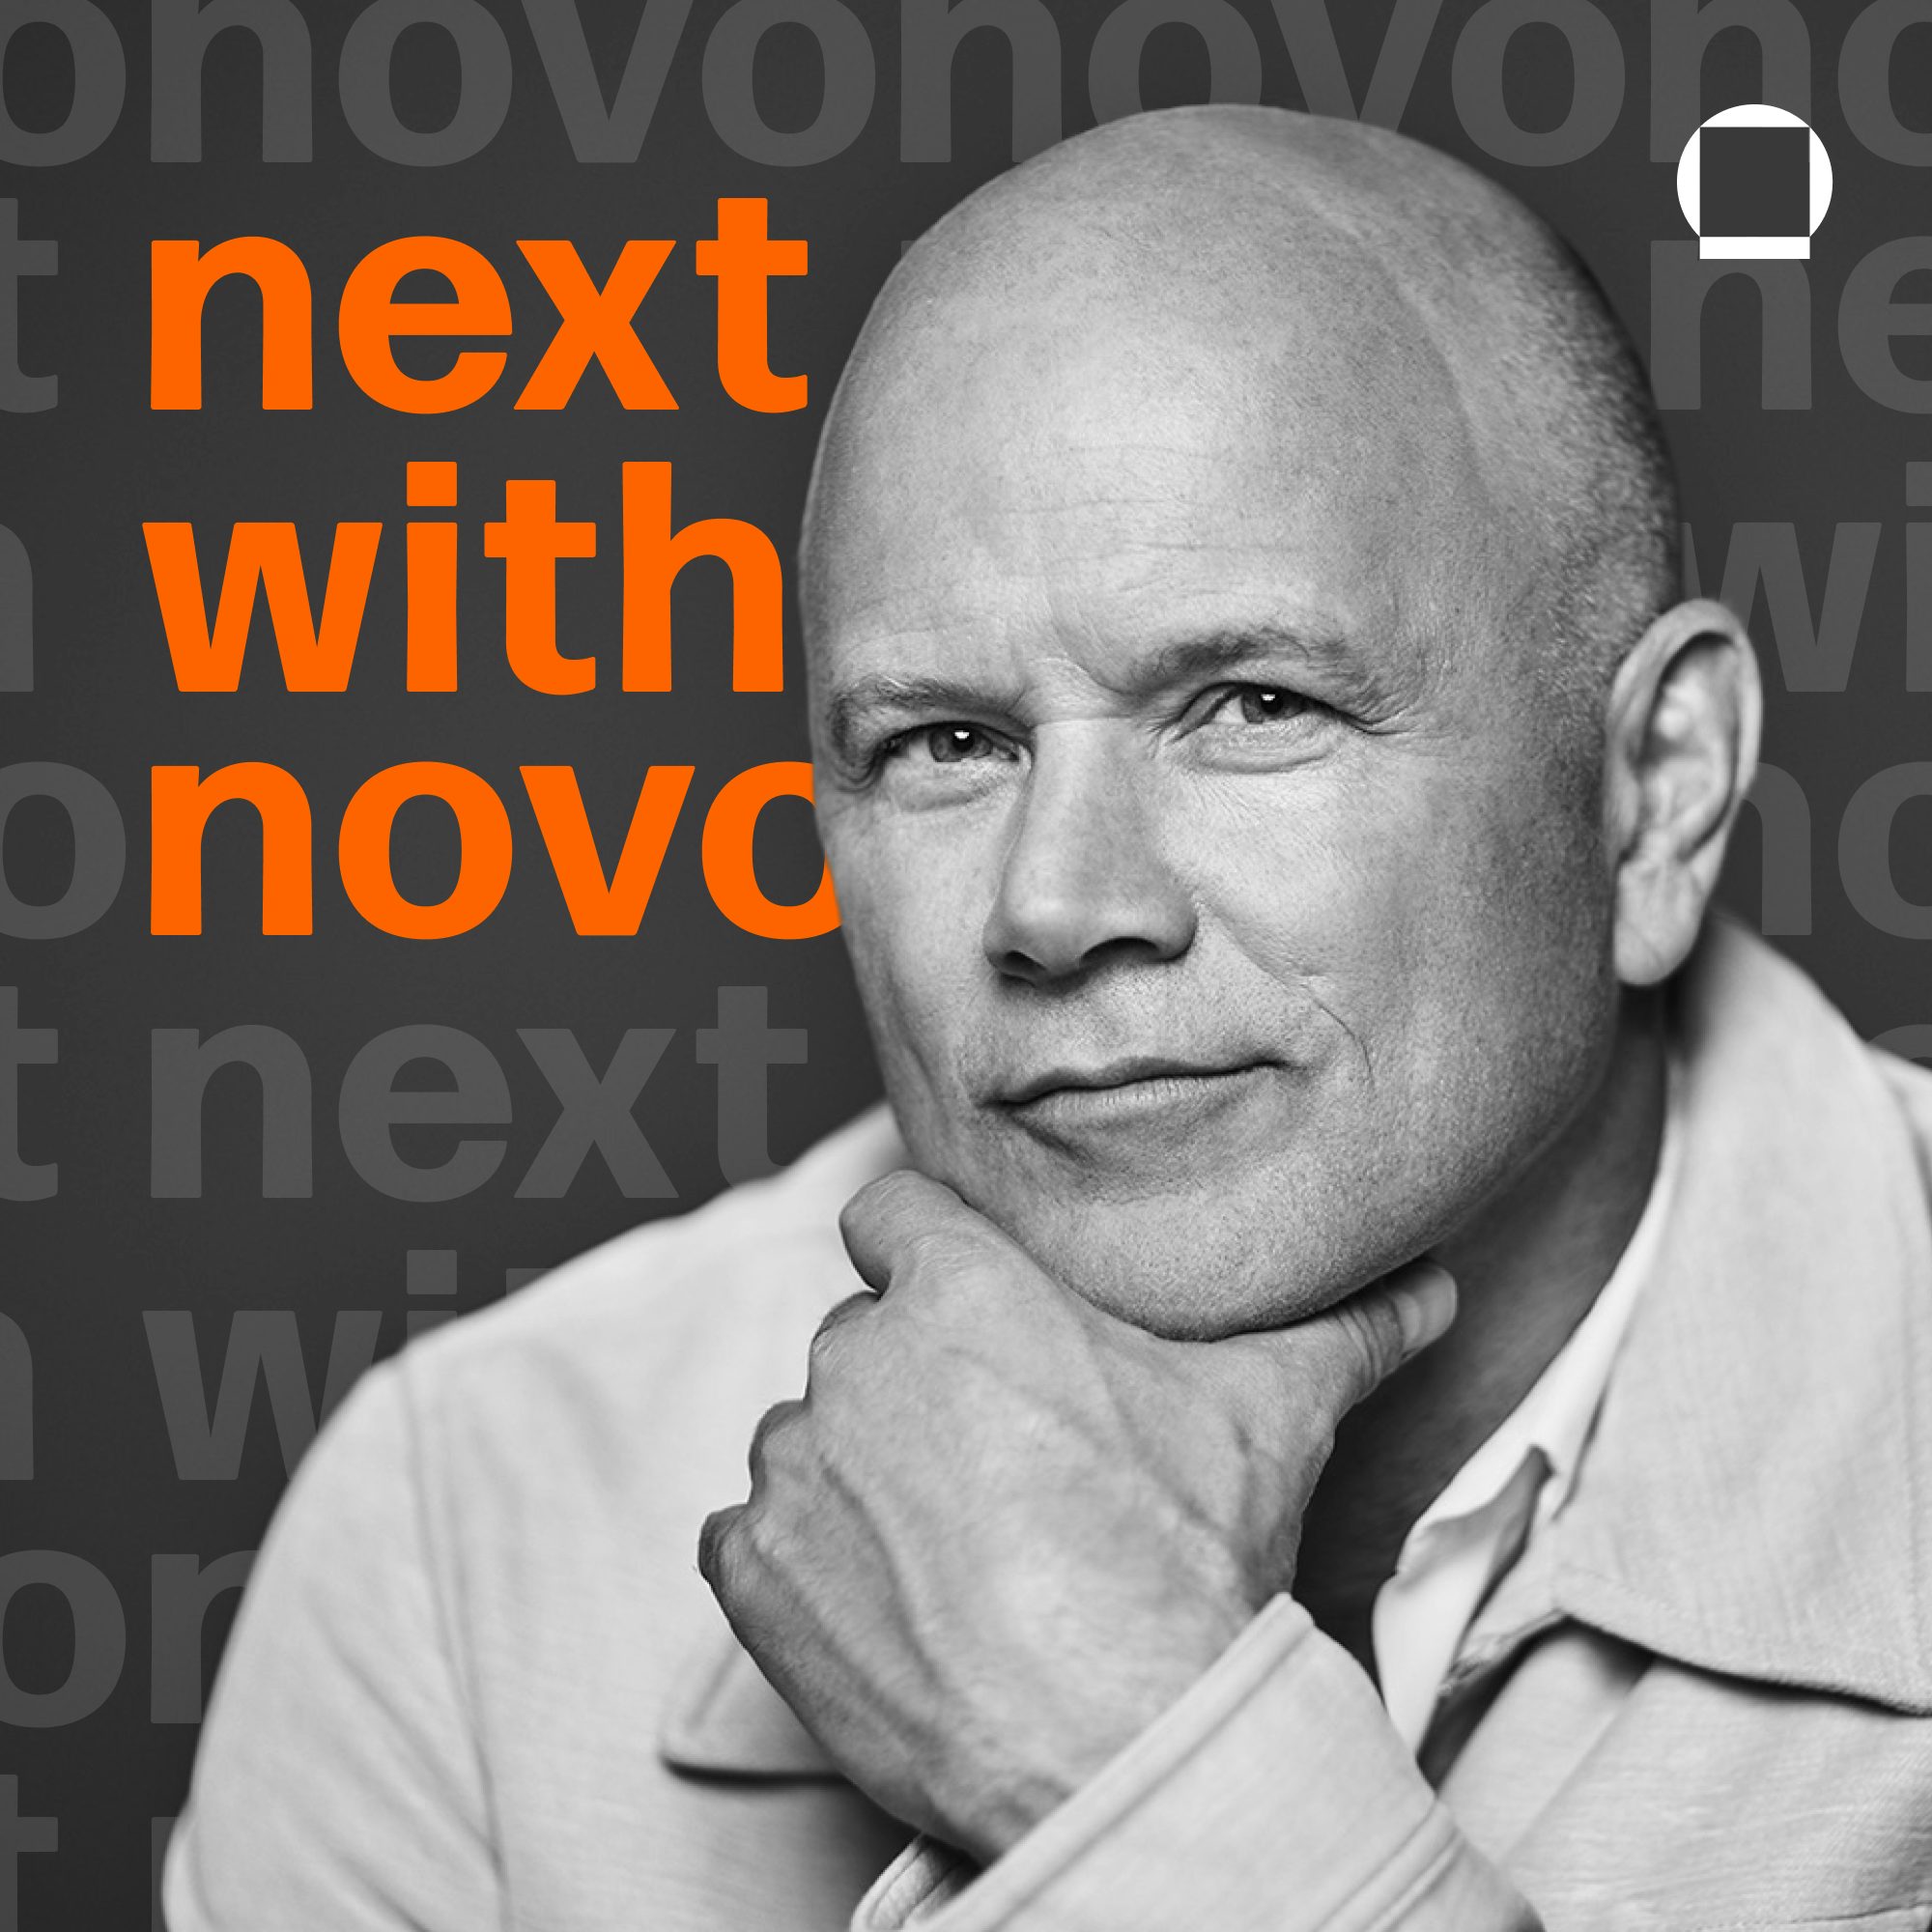 EP 40 - The State of Crypto with Mike Novogratz